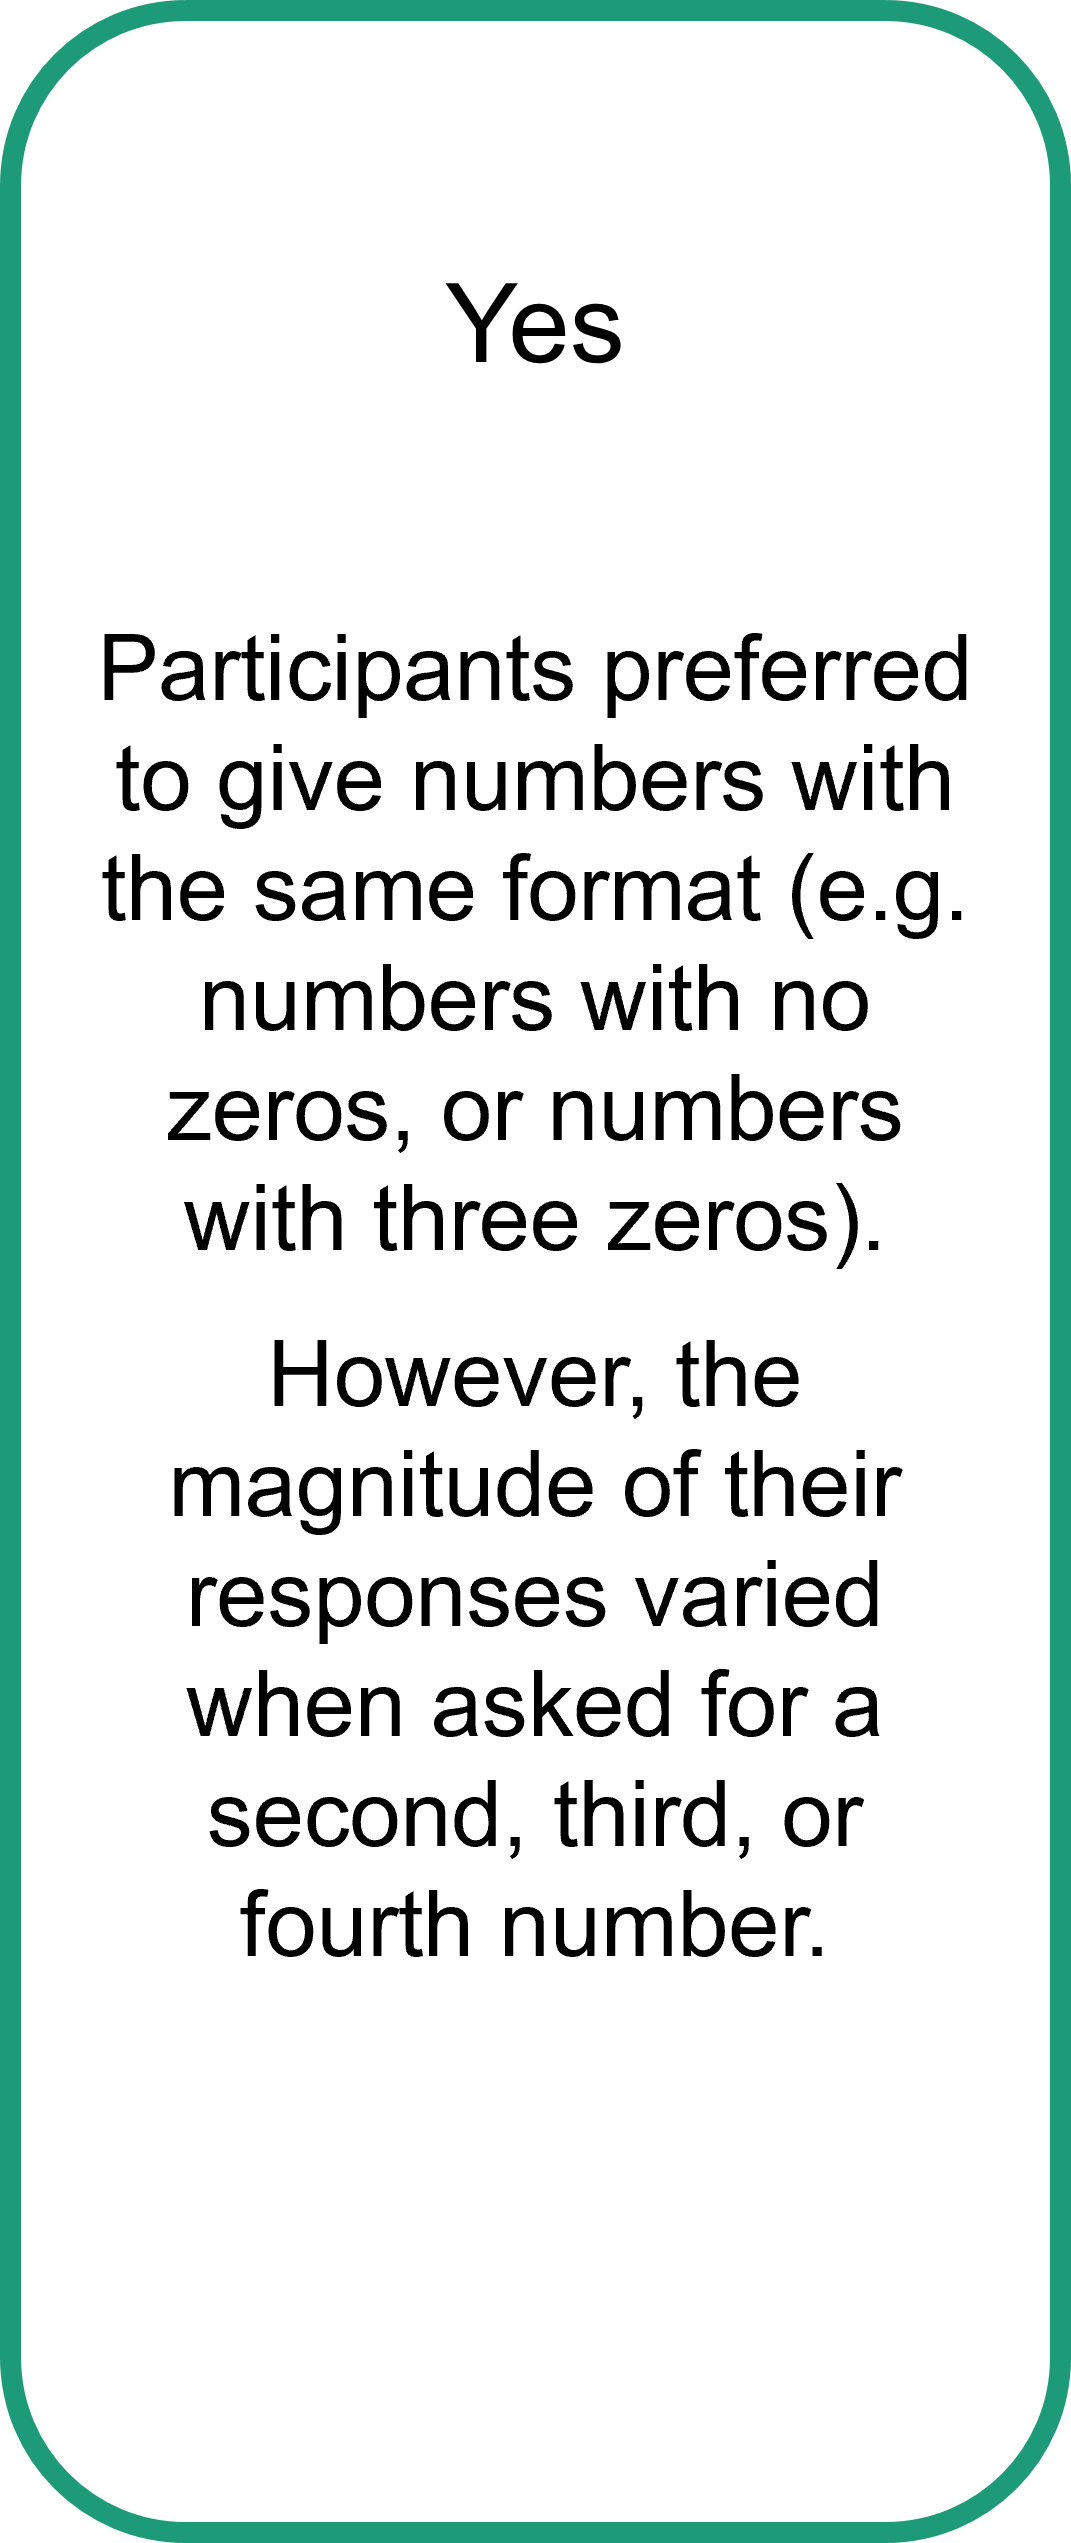 1. Do participants generate similar numbers when asked to give a second, third and fourth response? Yes  Participants preferred to give numbers with the same format (e.g. numbers with no zeros, or numbers with three zeros). However, the magnitude of their responses varied when asked for a second, third, or fourth number.